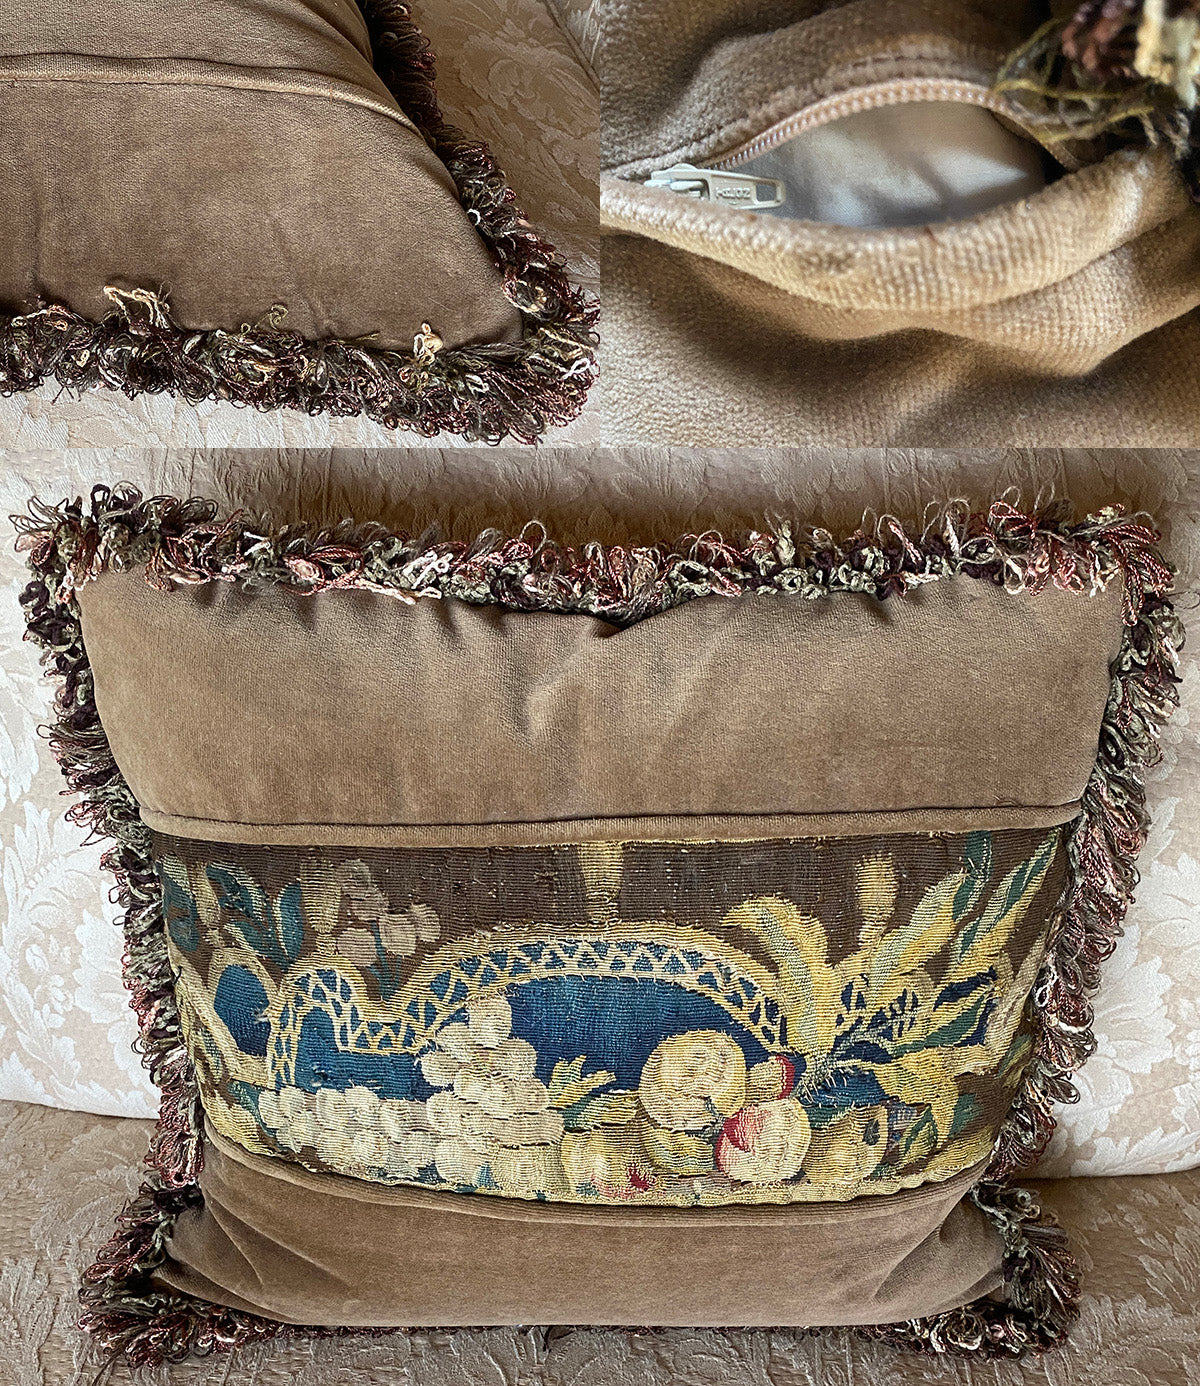 Antique 17th French Aubusson Tapestry Panel, Down-filled Throw or Decorator Pillow, Passementerie Fringe